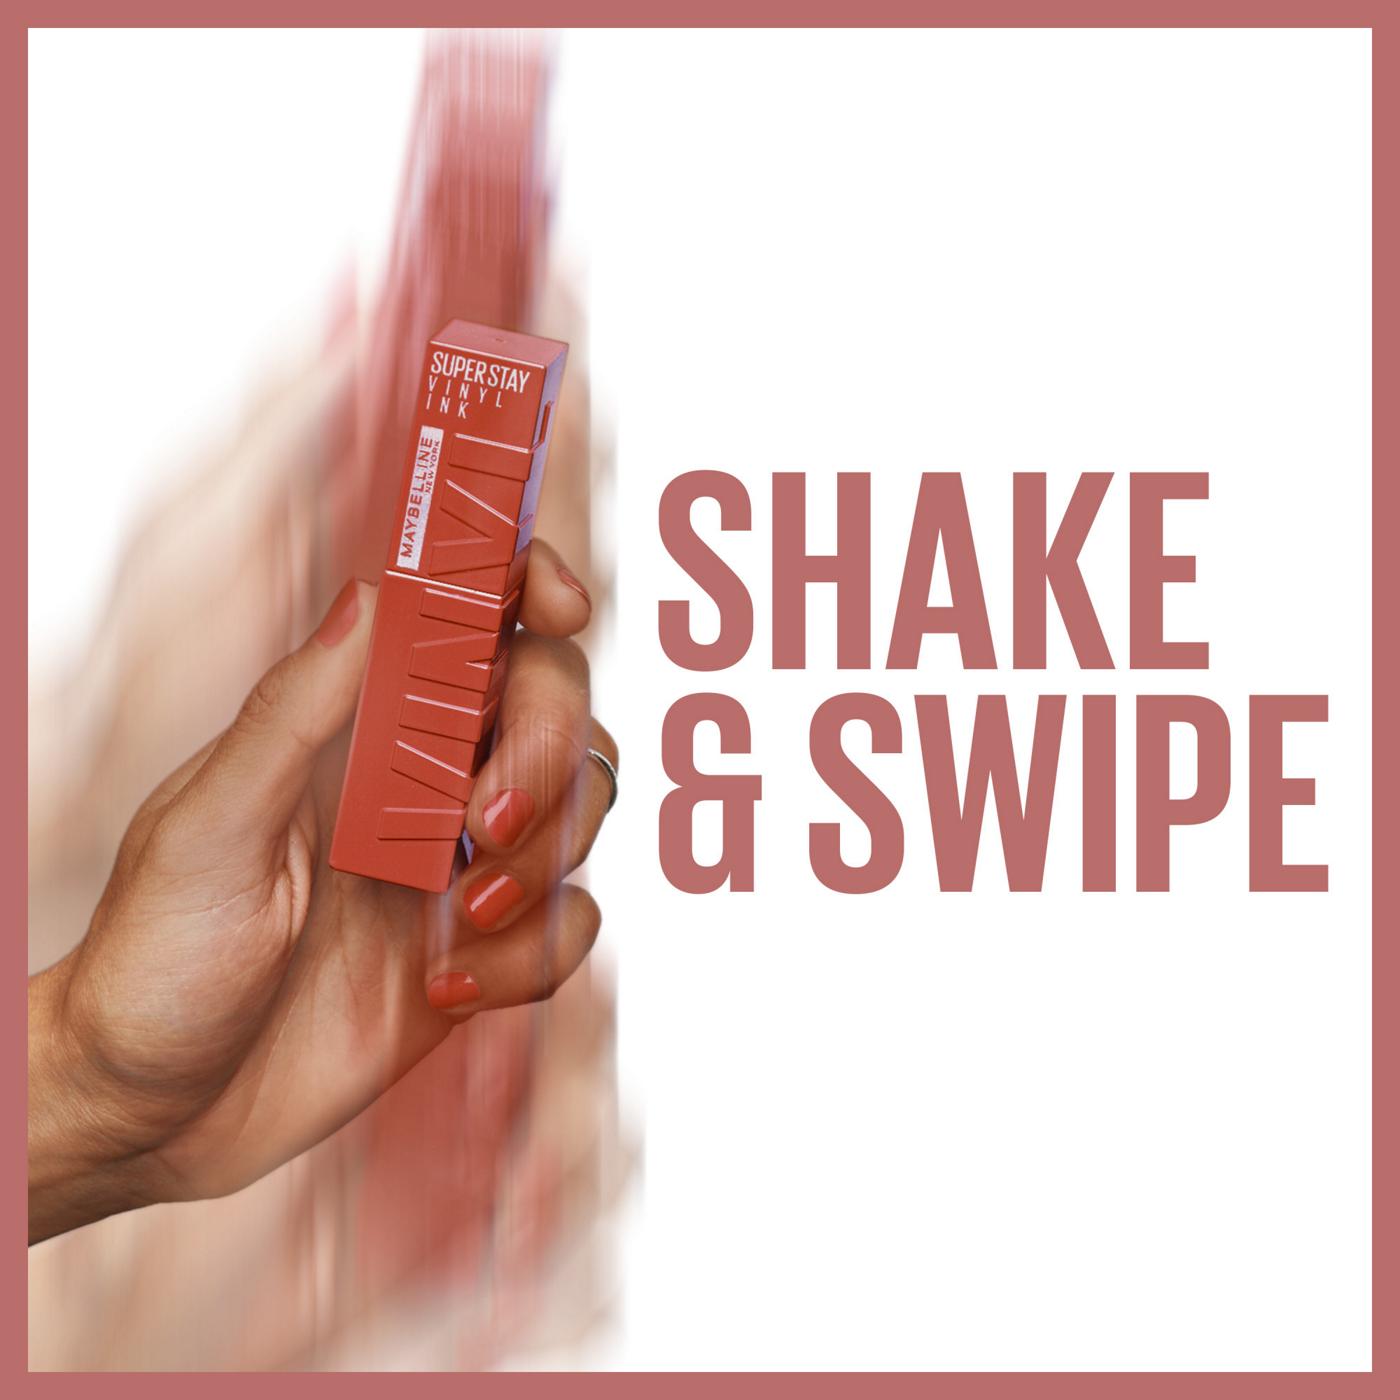 Maybelline Super Stay Vinyl Ink Liquid Lipstick - Fearless; image 8 of 10